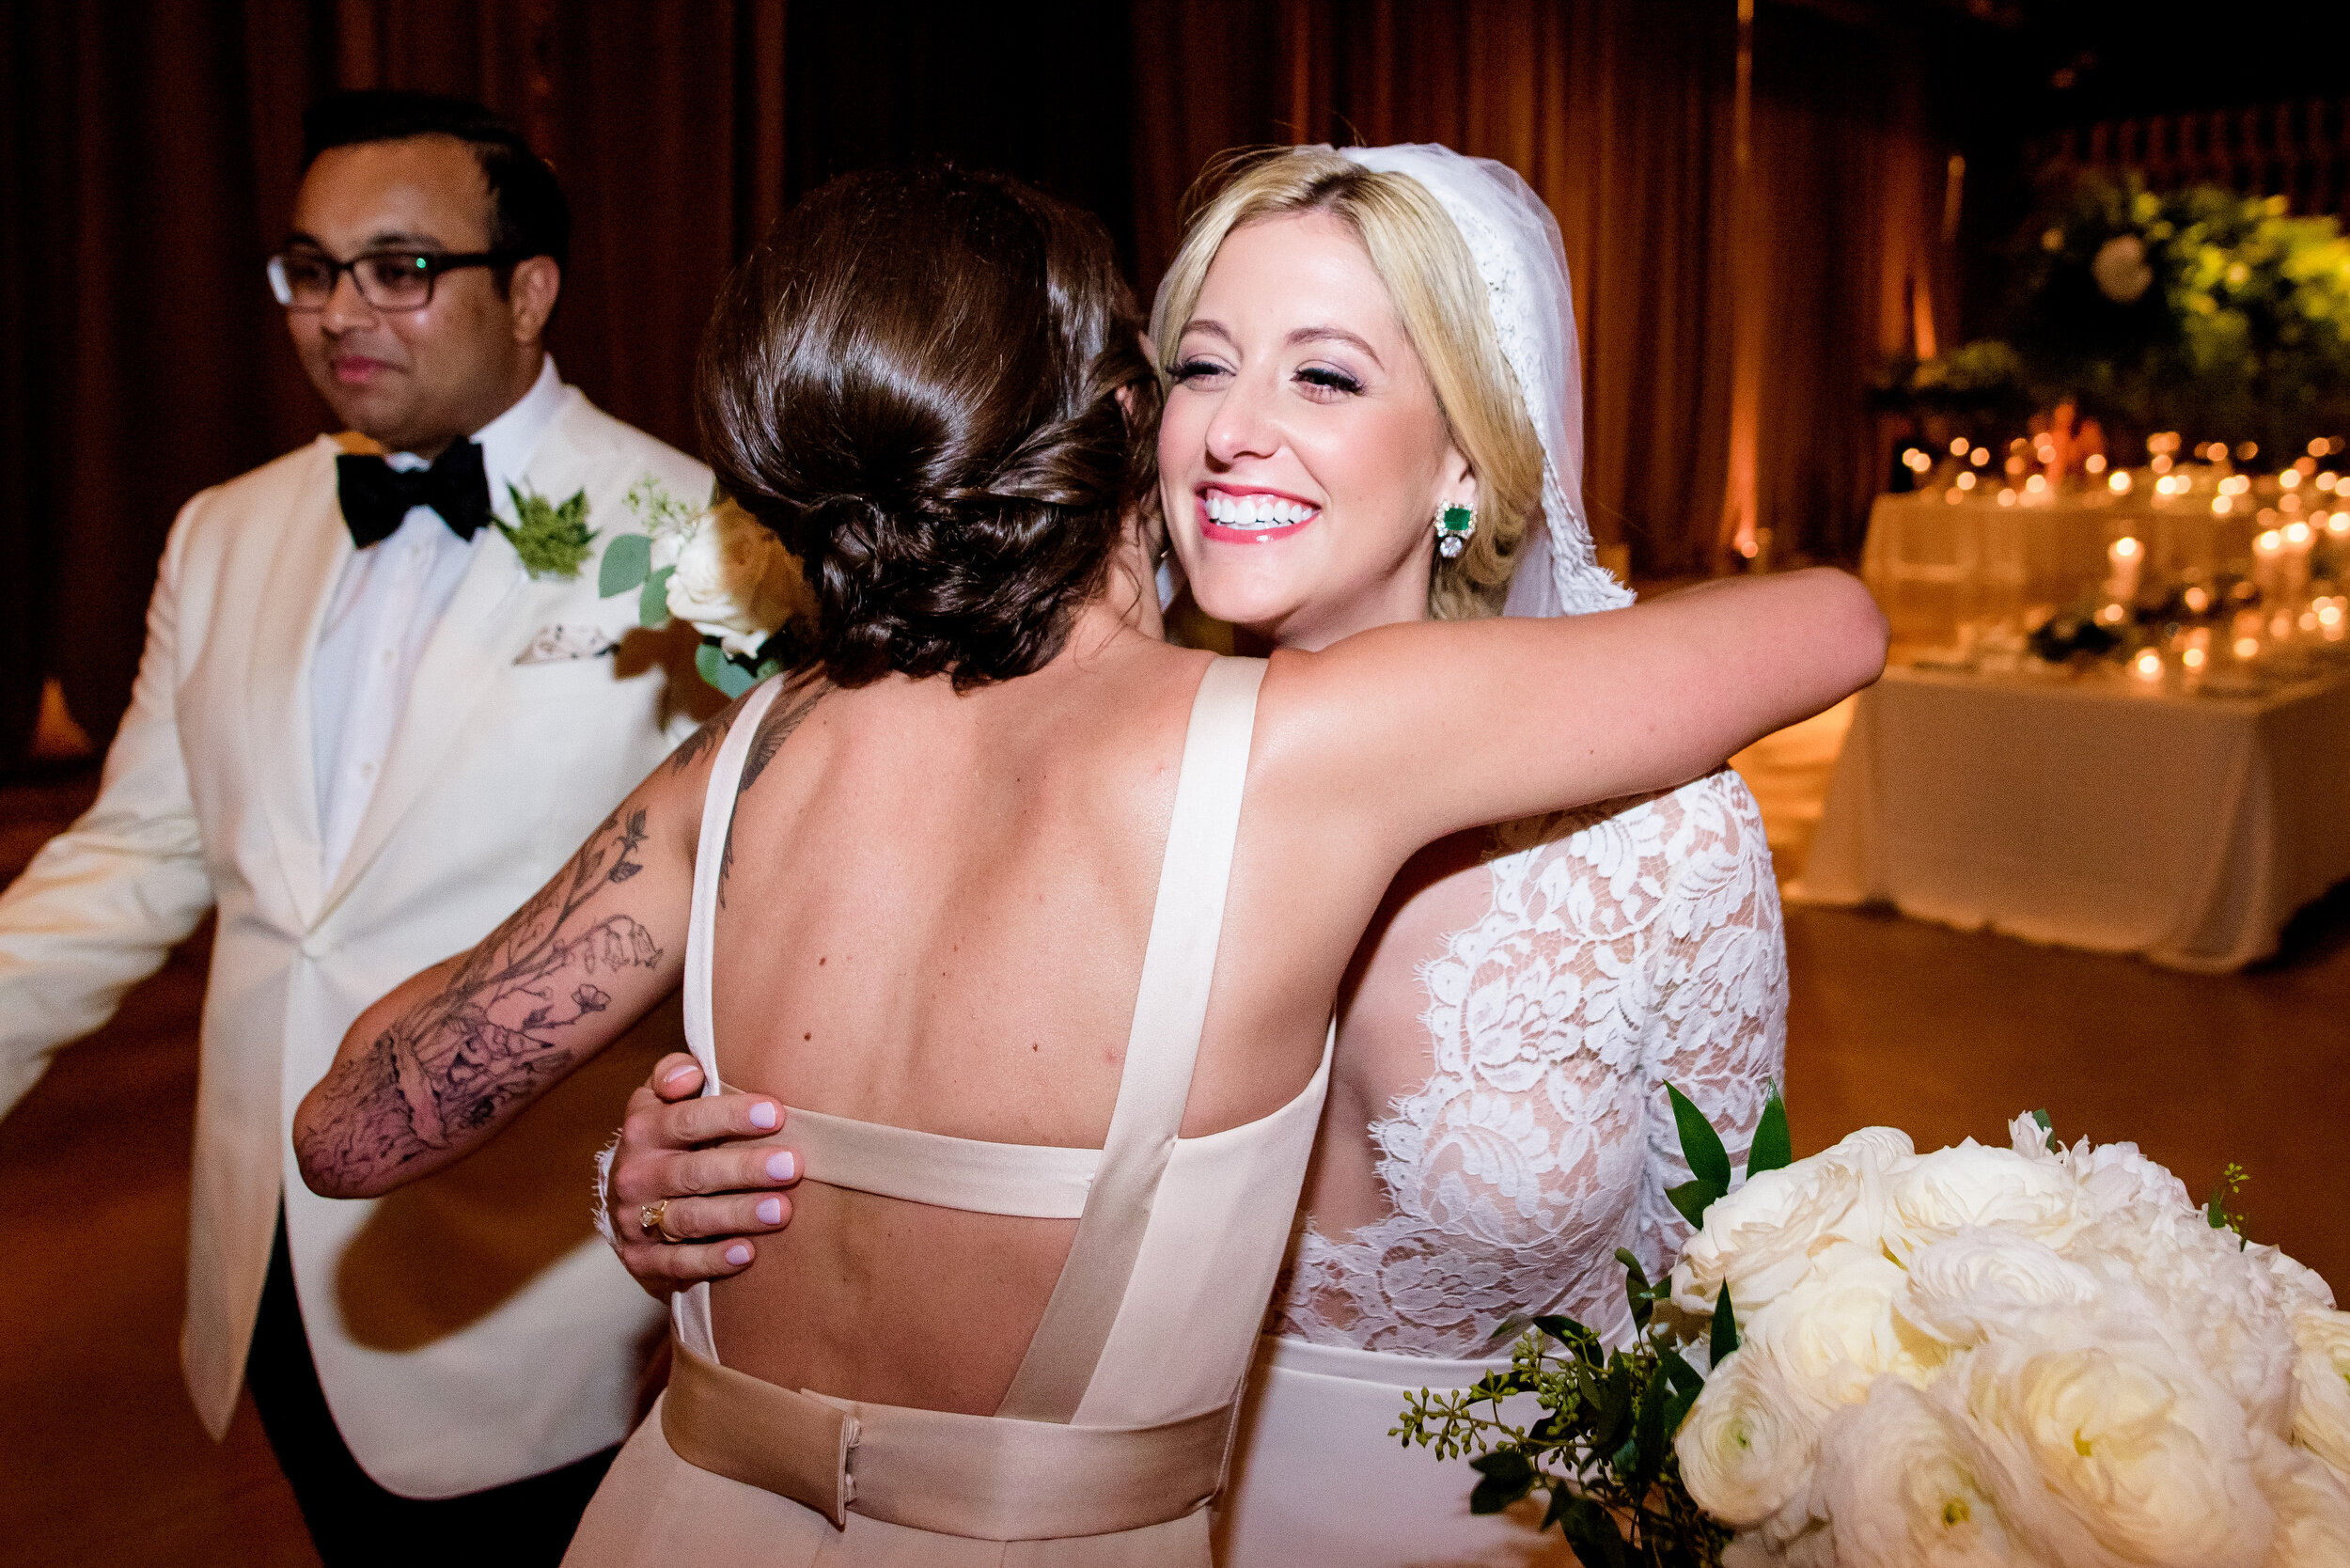 Bride hugs her sister after the ceremony: Geraghty Chicago wedding photography captured by J. Brown Photography.